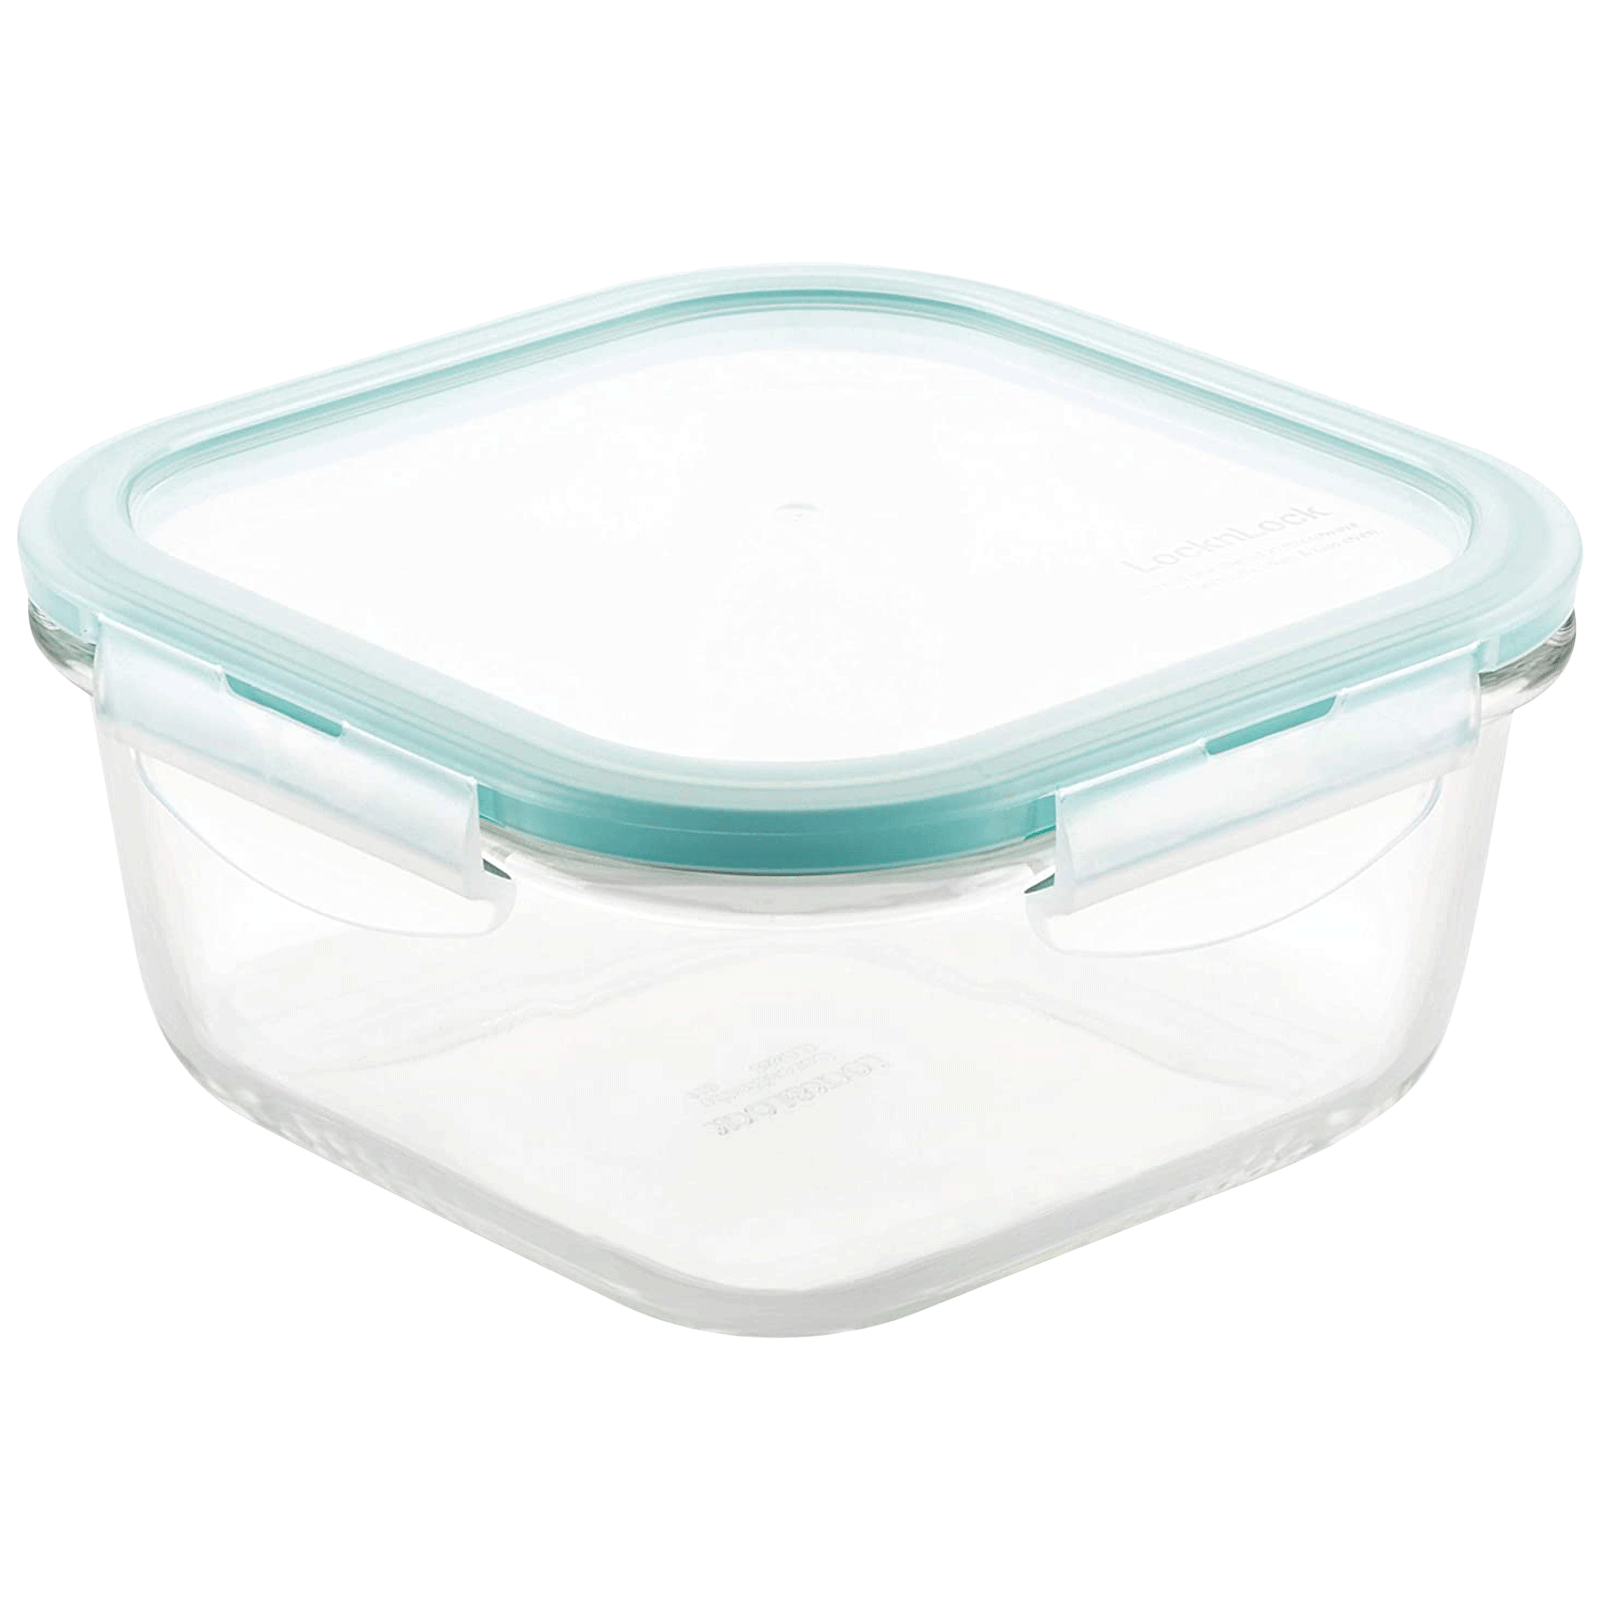 Lock & Lock Ovenglass 840 ml Square Glass Storage Container (Heat Resistant, LLG225, Transparent)_1